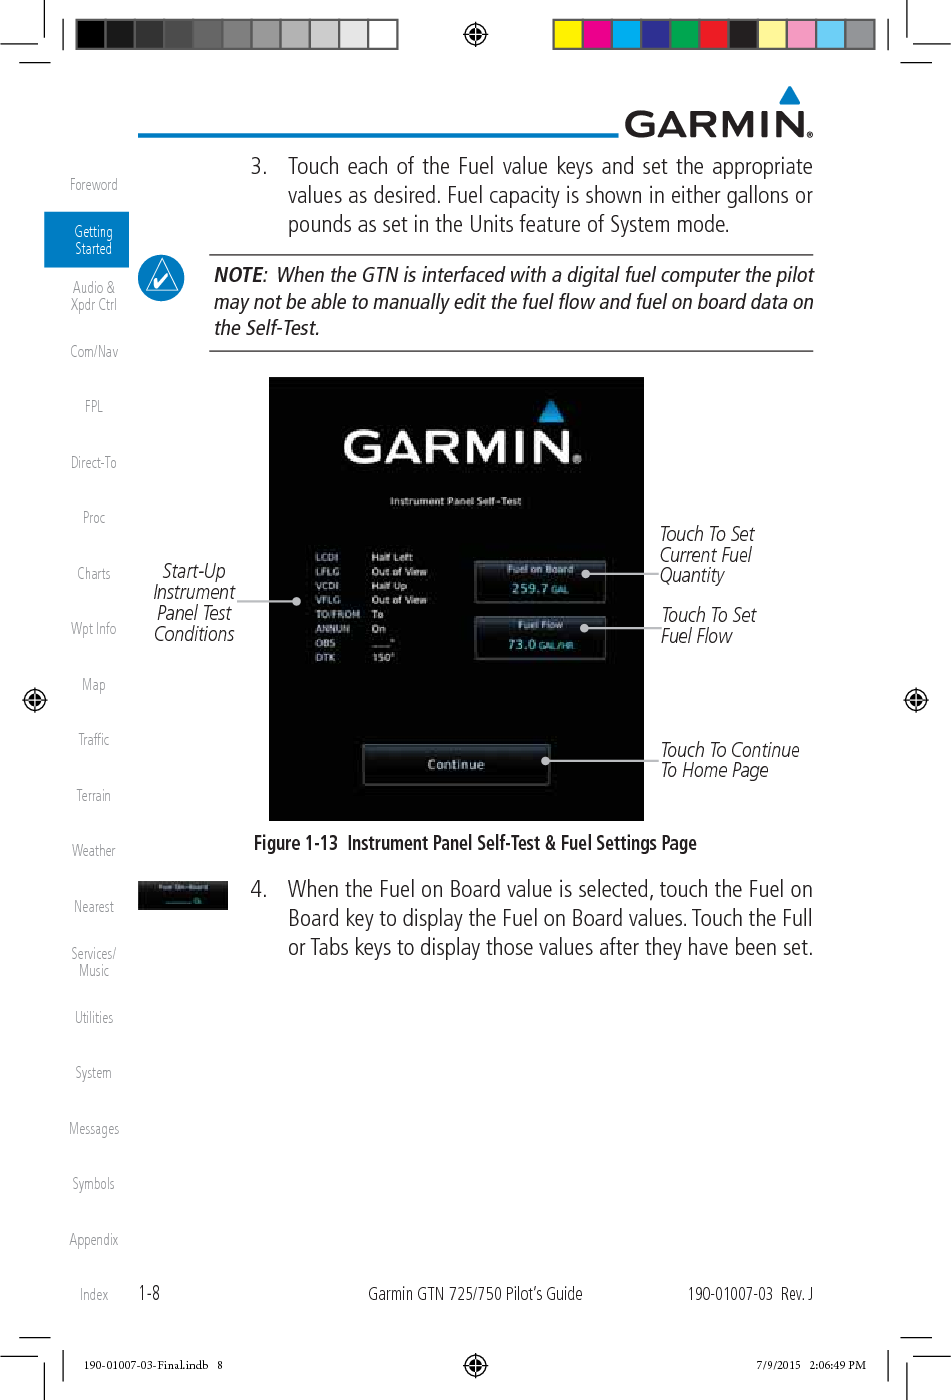 1-8Garmin GTN 725/750 Pilot’s Guide190-01007-03  Rev. JForewordGetting StartedAudio &amp;  Xpdr CtrlCom/NavFPLDirect-ToProcChartsWpt InfoMapTrafﬁcTerrainWeatherNearestServices/ MusicUtilitiesSystemMessagesSymbolsAppendixIndex  3.  Touch each of the Fuel value keys and set the appropriate values as desired. Fuel capacity is shown in either gallons or pounds as set in the Units feature of System mode.  NOTE:  When the GTN is interfaced with a digital fuel computer the pilot may not be able to manually edit the fuel ﬂow and fuel on board data on the Self-Test. Touch To Set Current Fuel QuantityStart-Up Instrument Panel Test ConditionsTouch To Continue To Home PageTouch To Set Fuel FlowFigure 1-13  Instrument Panel Self-Test &amp; Fuel Settings Page  4.  When the Fuel on Board value is selected, touch the Fuel on Board key to display the Fuel on Board values. Touch the Full or Tabs keys to display those values after they have been set. 190-01007-03-Final.indb   8 7/9/2015   2:06:49 PM